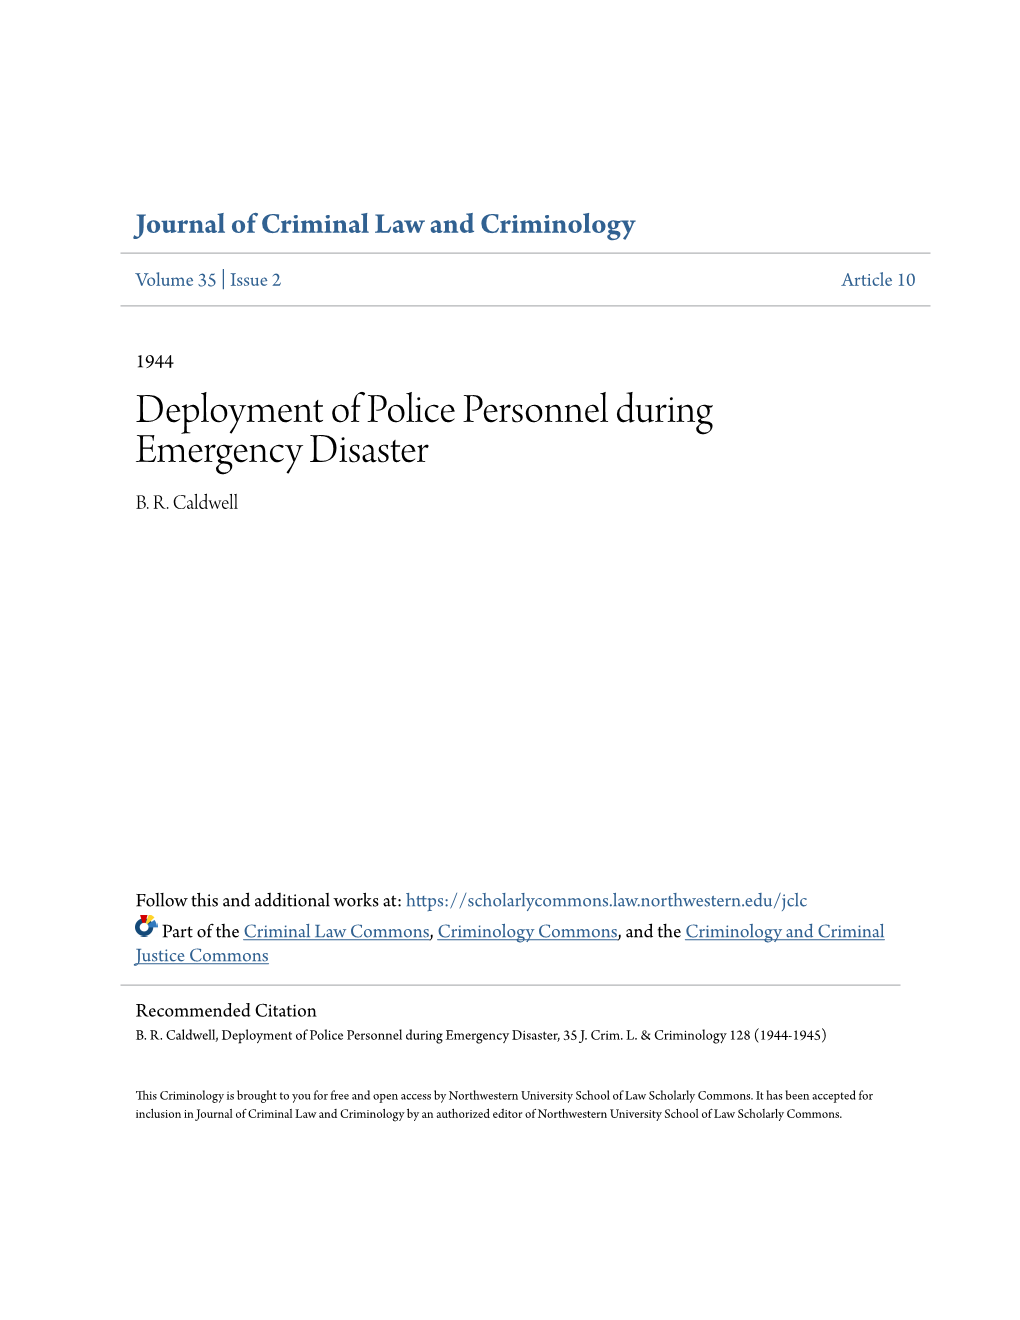 Deployment of Police Personnel During Emergency Disaster B